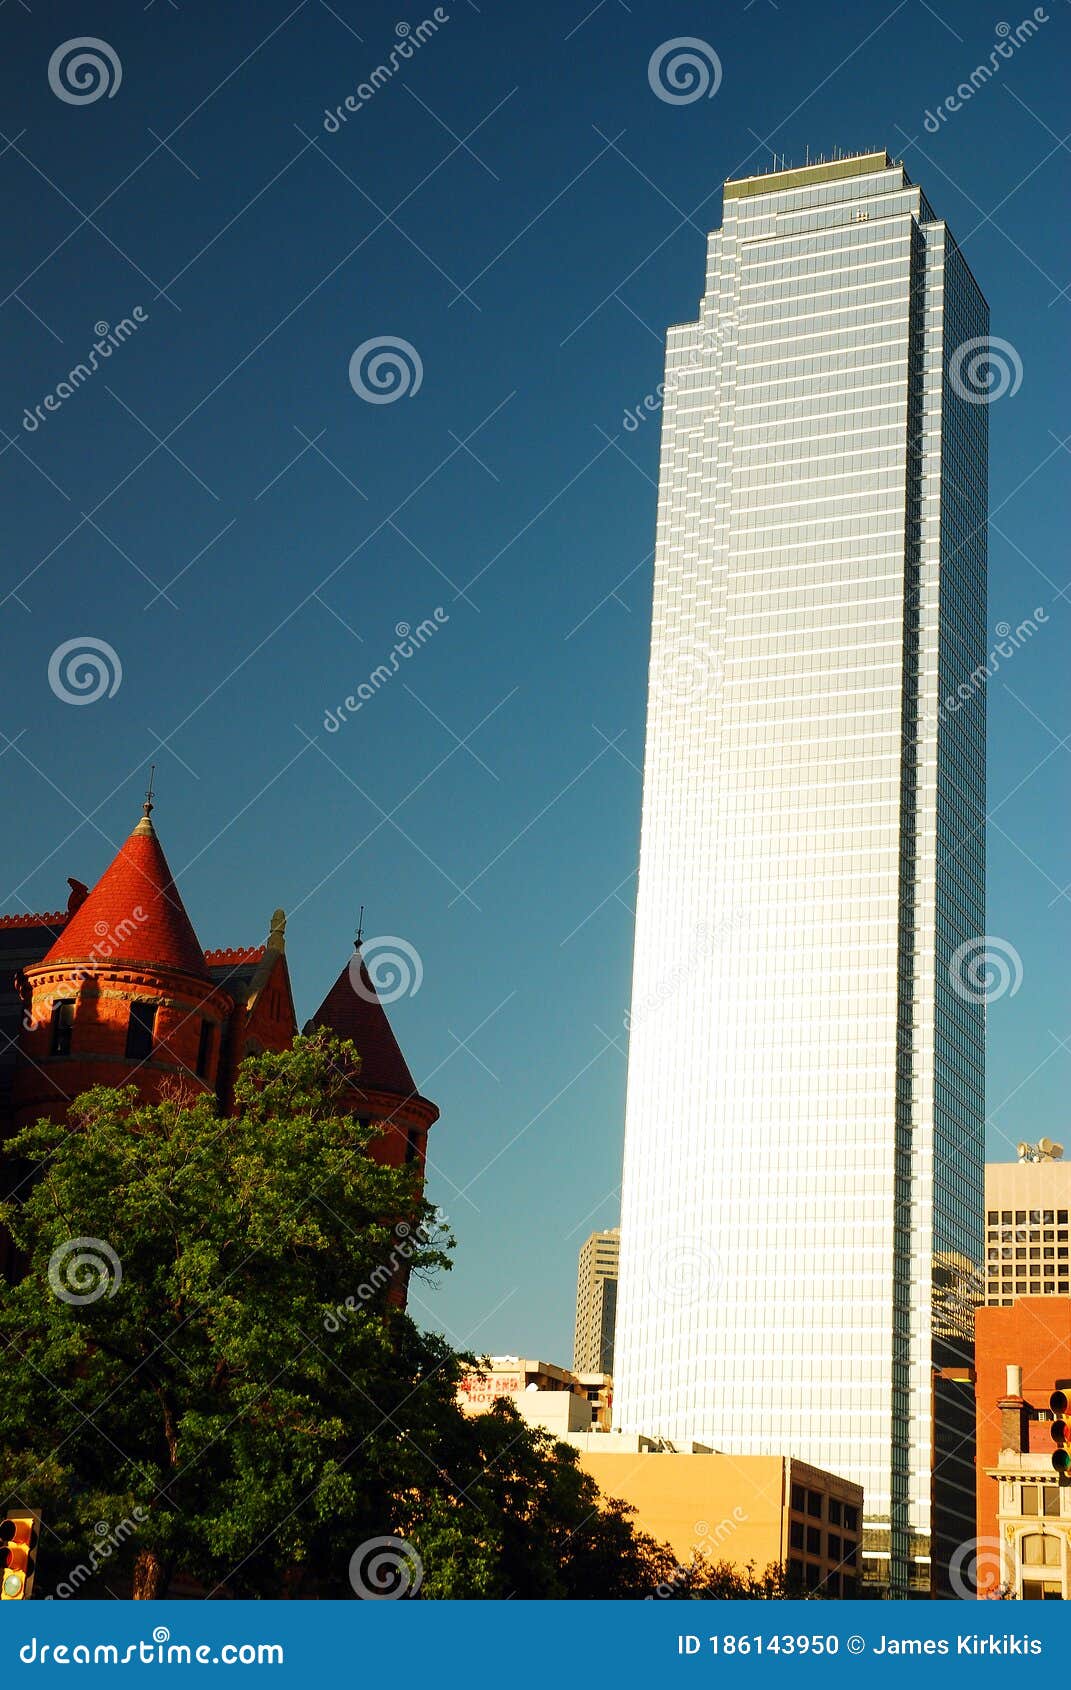 the bank of america tower, dallas